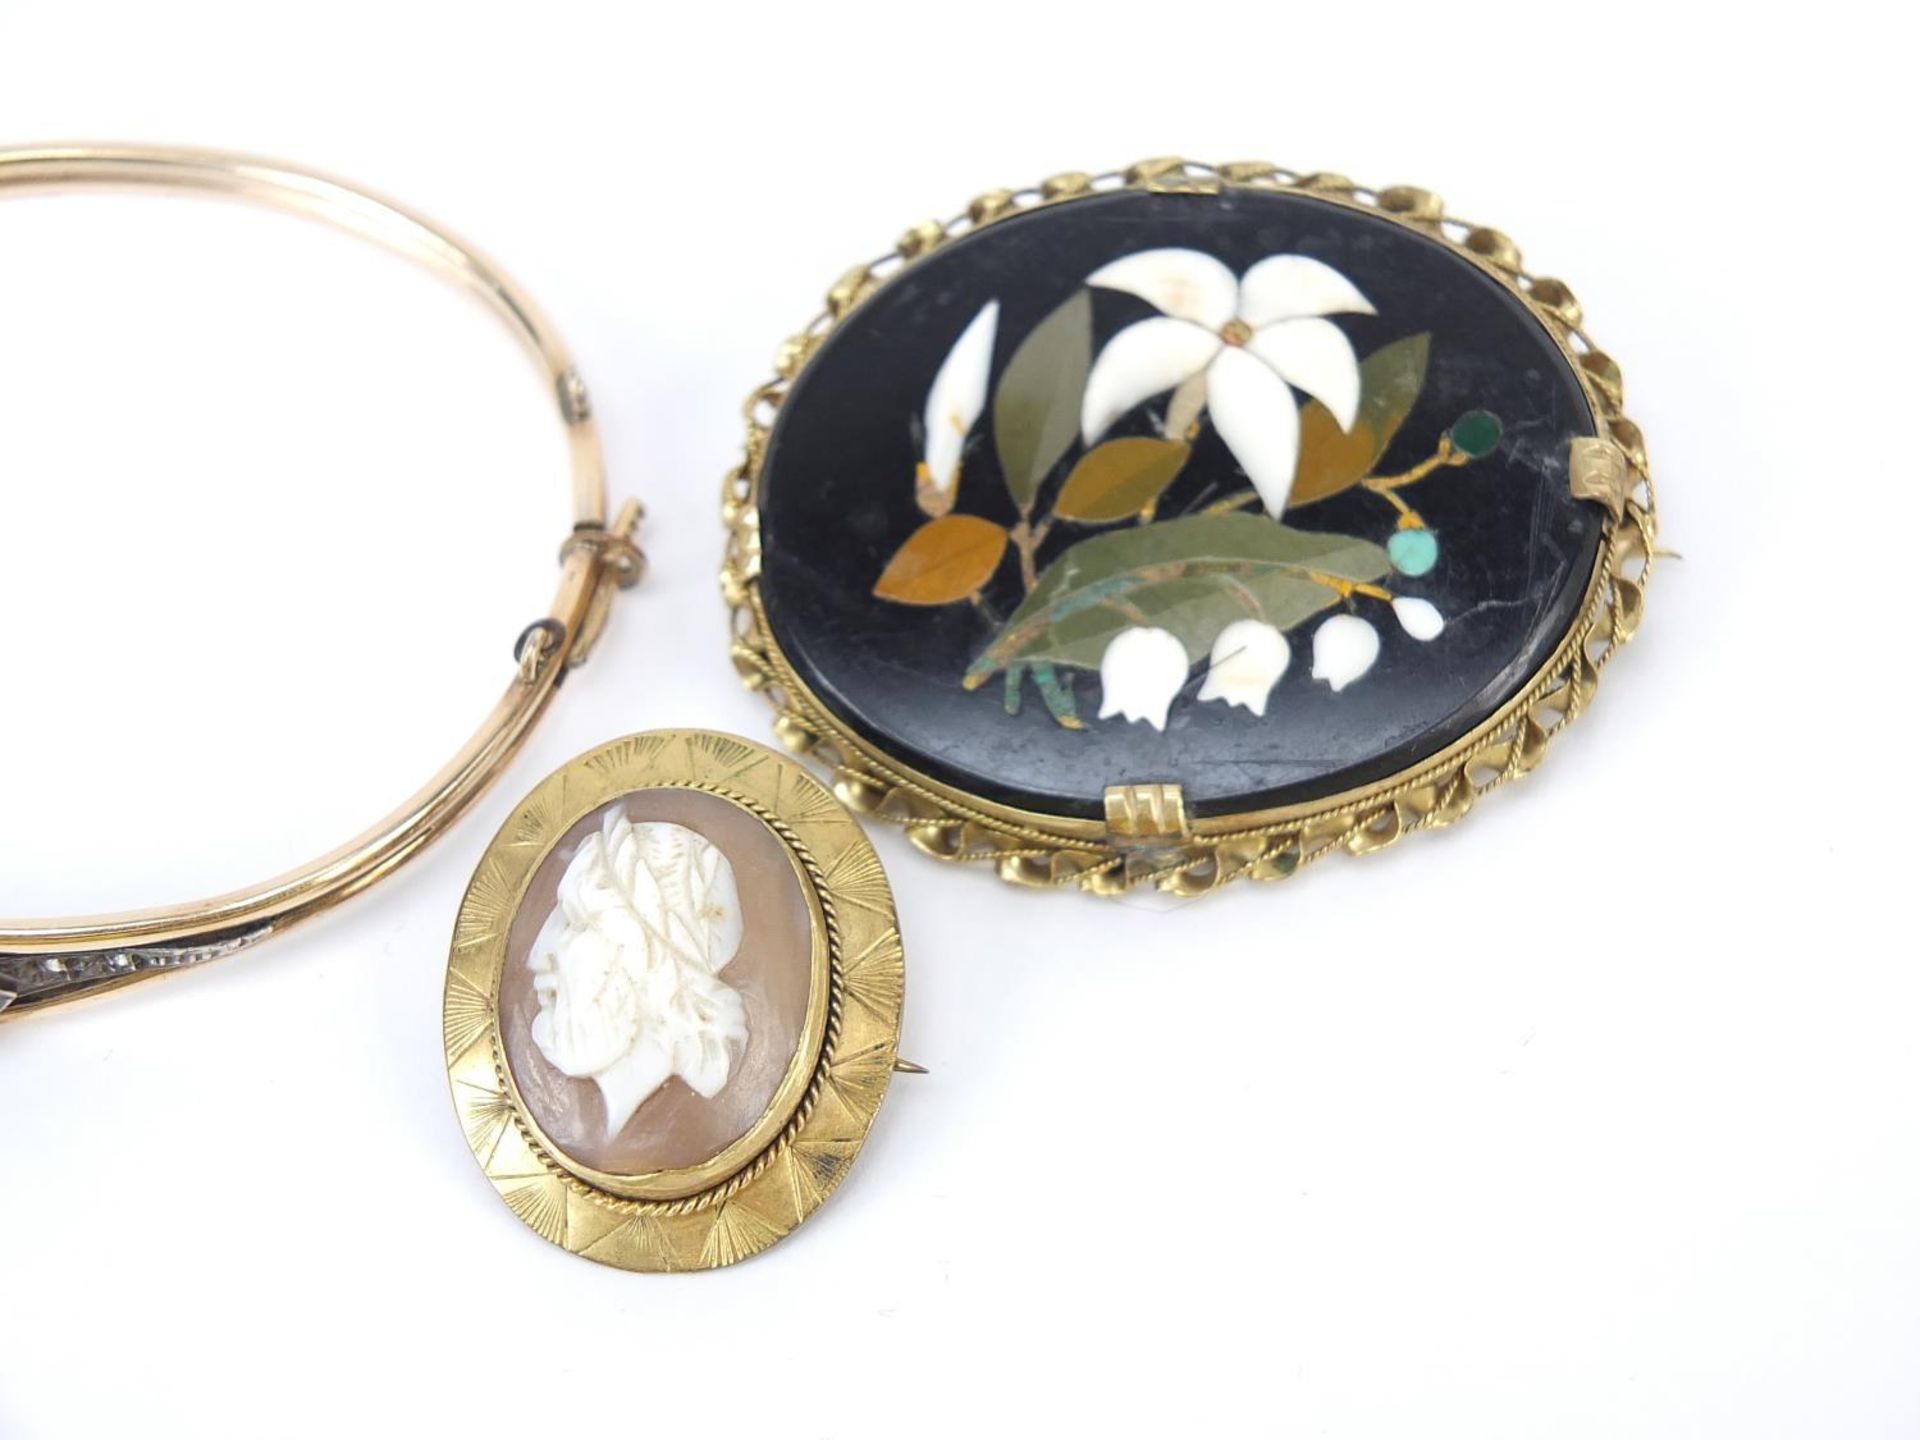 Antique jewellery comprising a pietra dura brooch, cameo brooch and a black and clear sapphire - Image 3 of 4